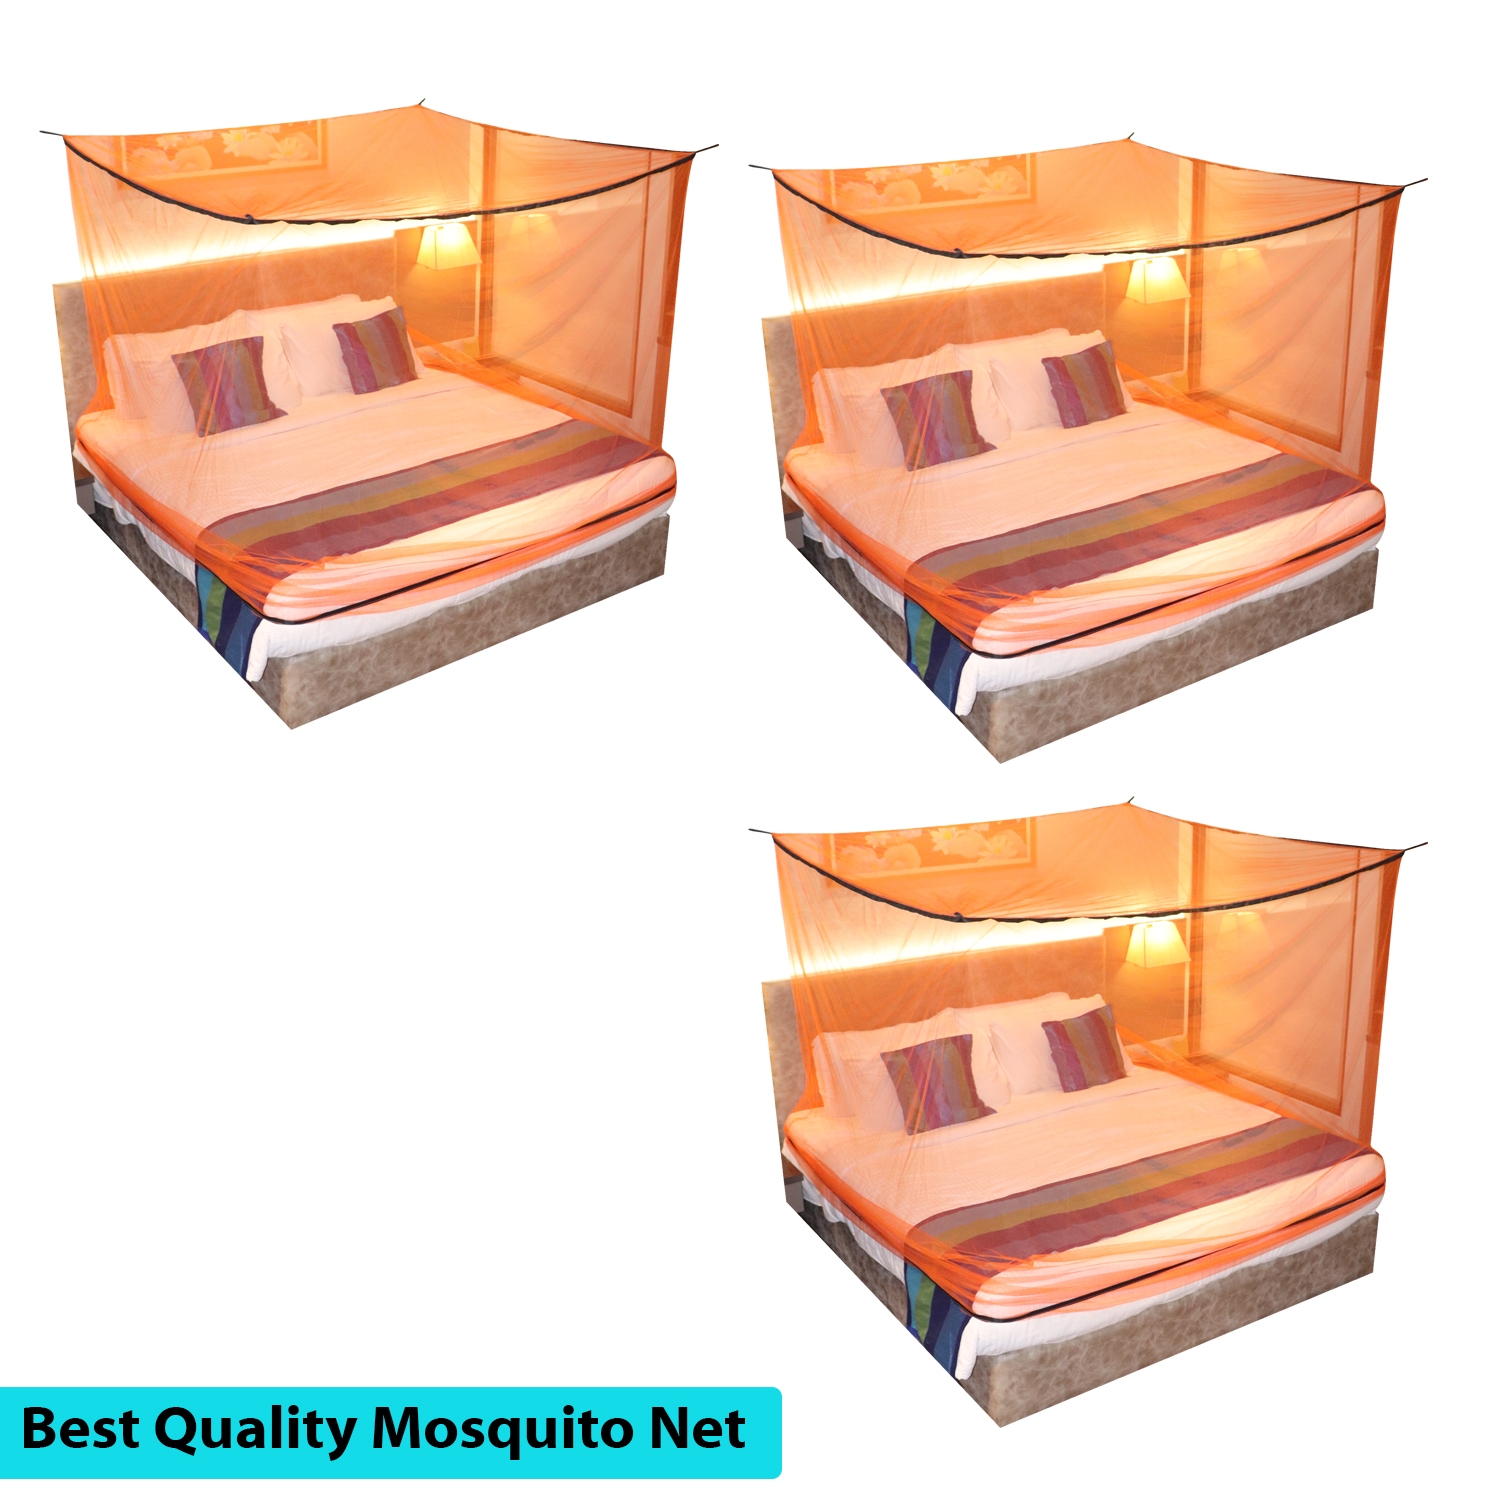 Paola Jewels | Mosquito Net for Double Bed, King-Size, Square Hanging Foldable Polyester Net Orange And Black Pack of 3